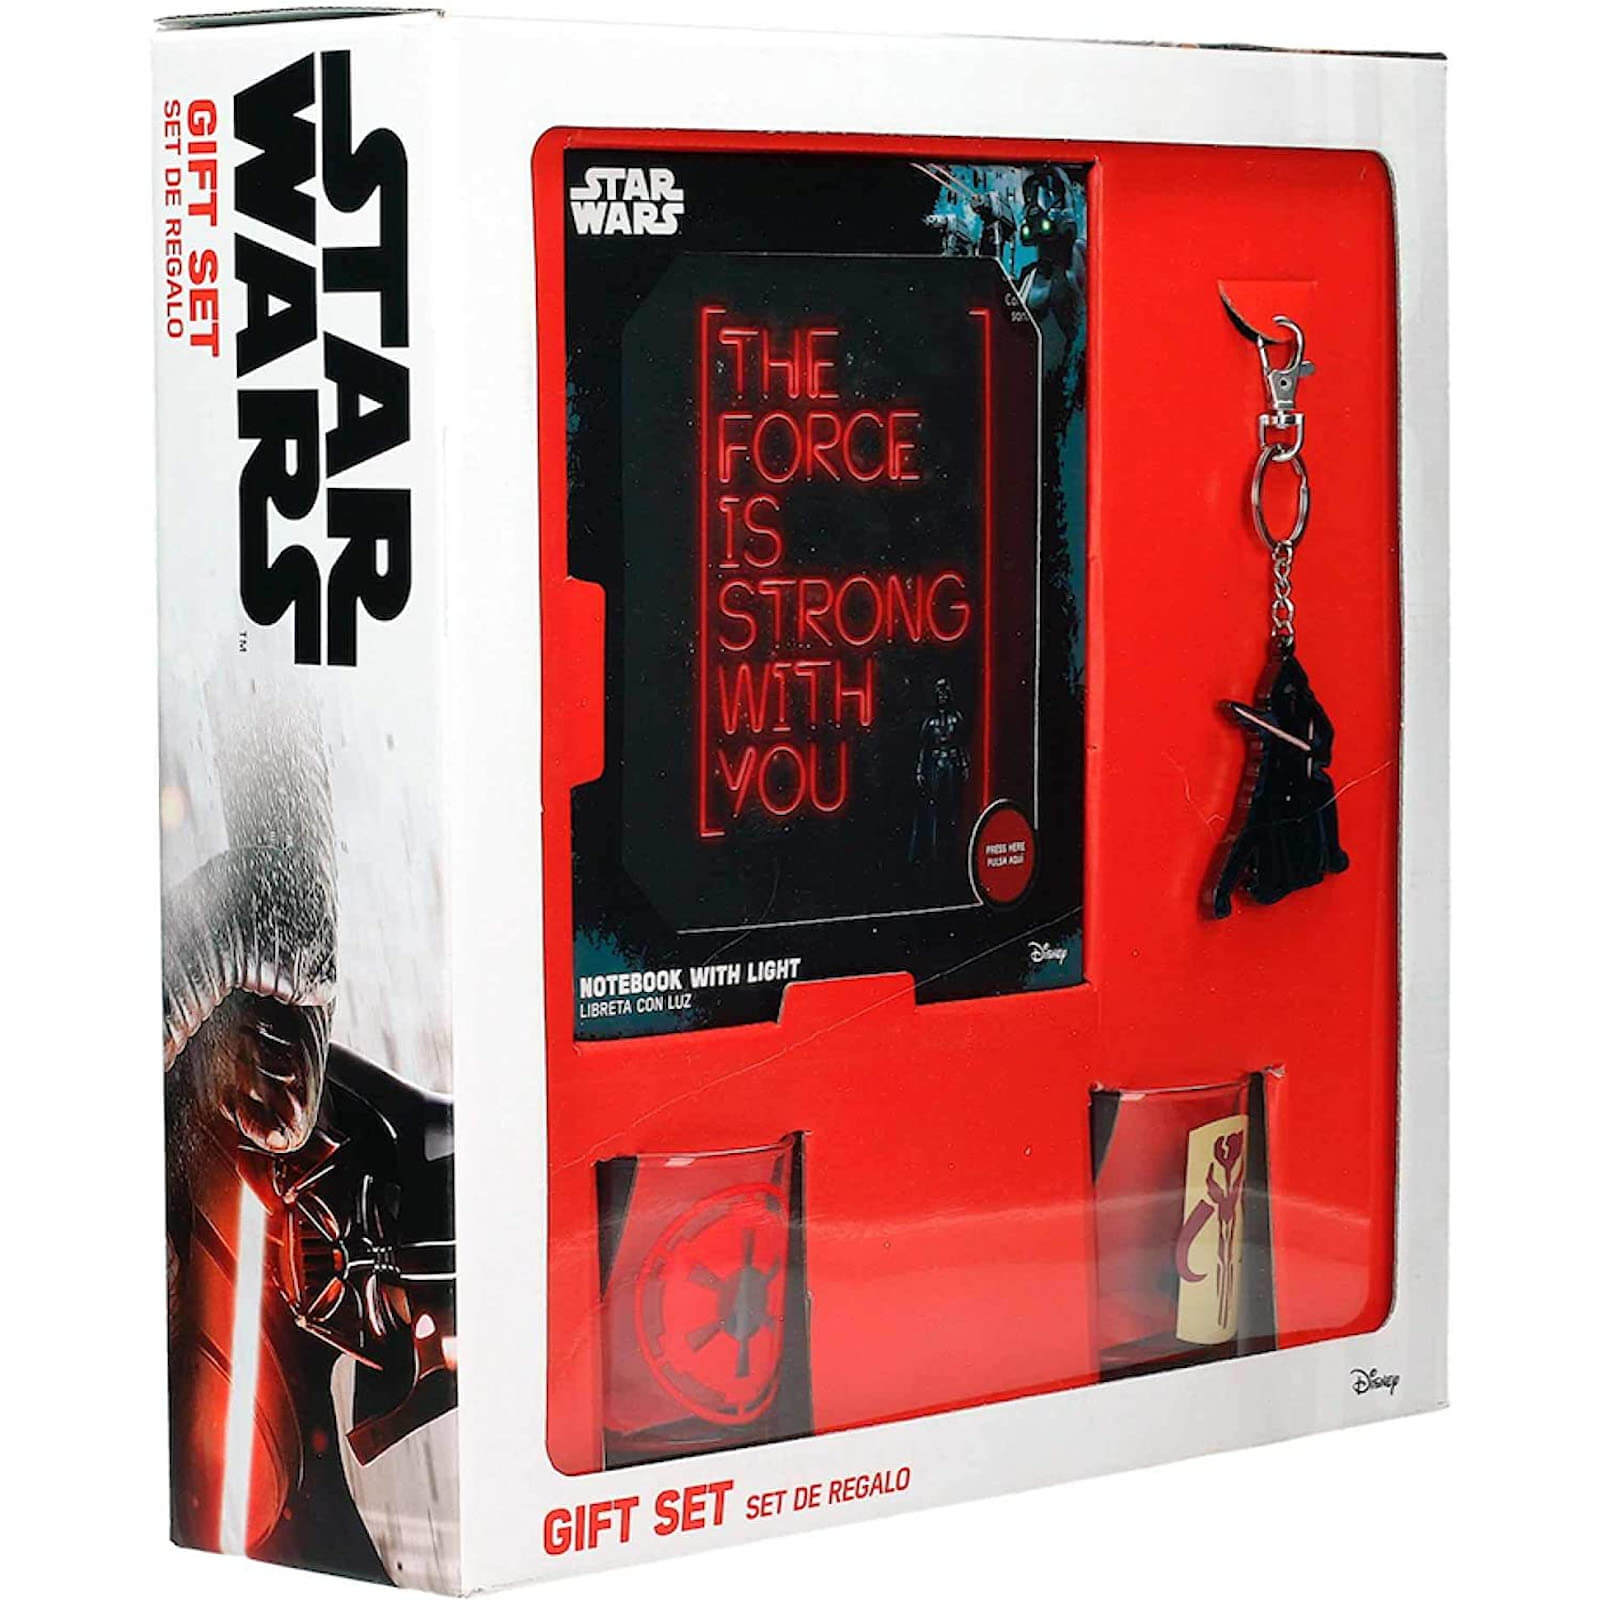 Star Wars Gift Set Notebook Glasses And Keychain